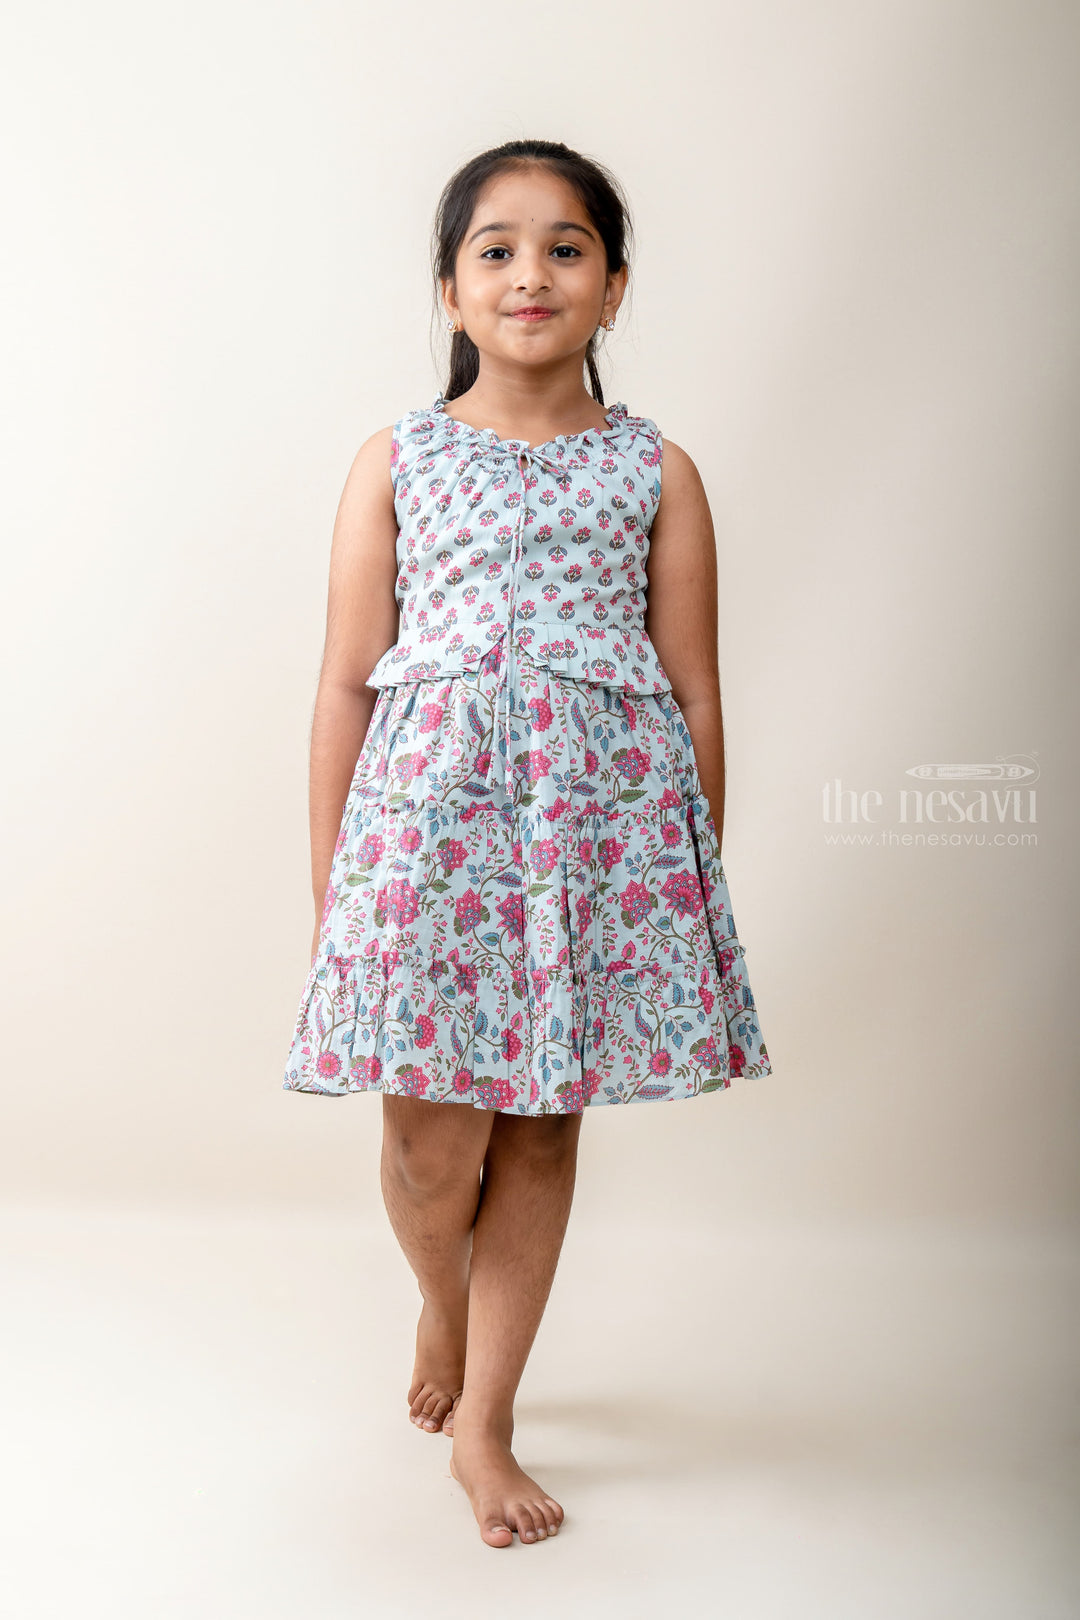 The Nesavu Frocks & Dresses Floral Printed Seagreen Collar Cotton Frock With Top Knot. psr silks Nesavu 16 (1Y ) / Seagreen GFC960B